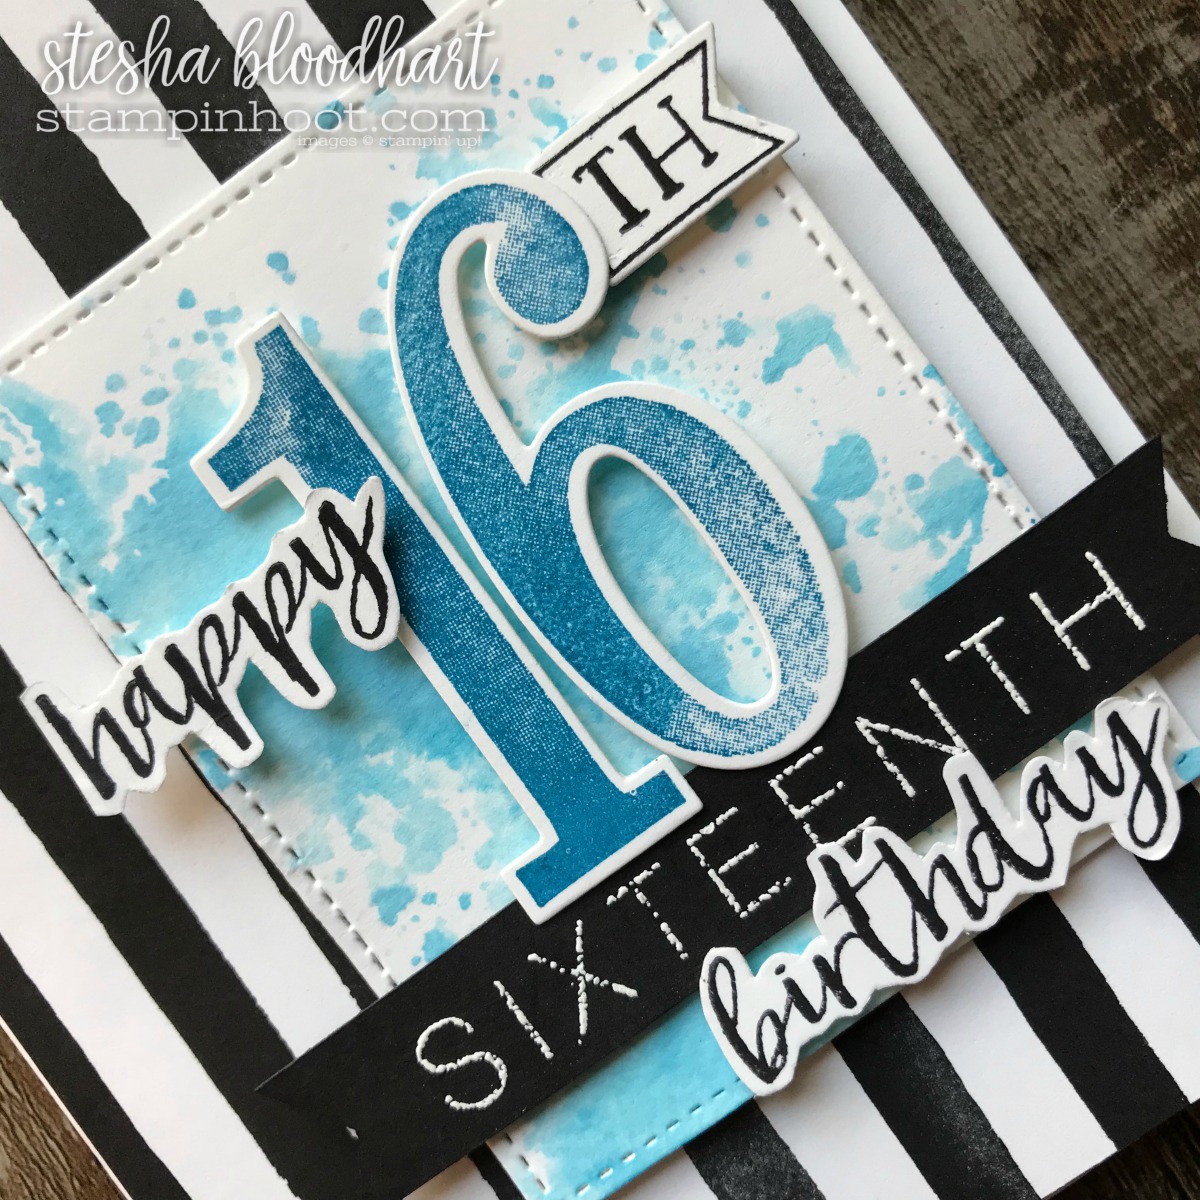 Party Pandas Level 1 Sale-A-Bration Stamp Set by Stampin' Up! Birthday Card created by Stesha Bloodhart, Stampin' Hoot! #steshabloodhart #stampinhoot